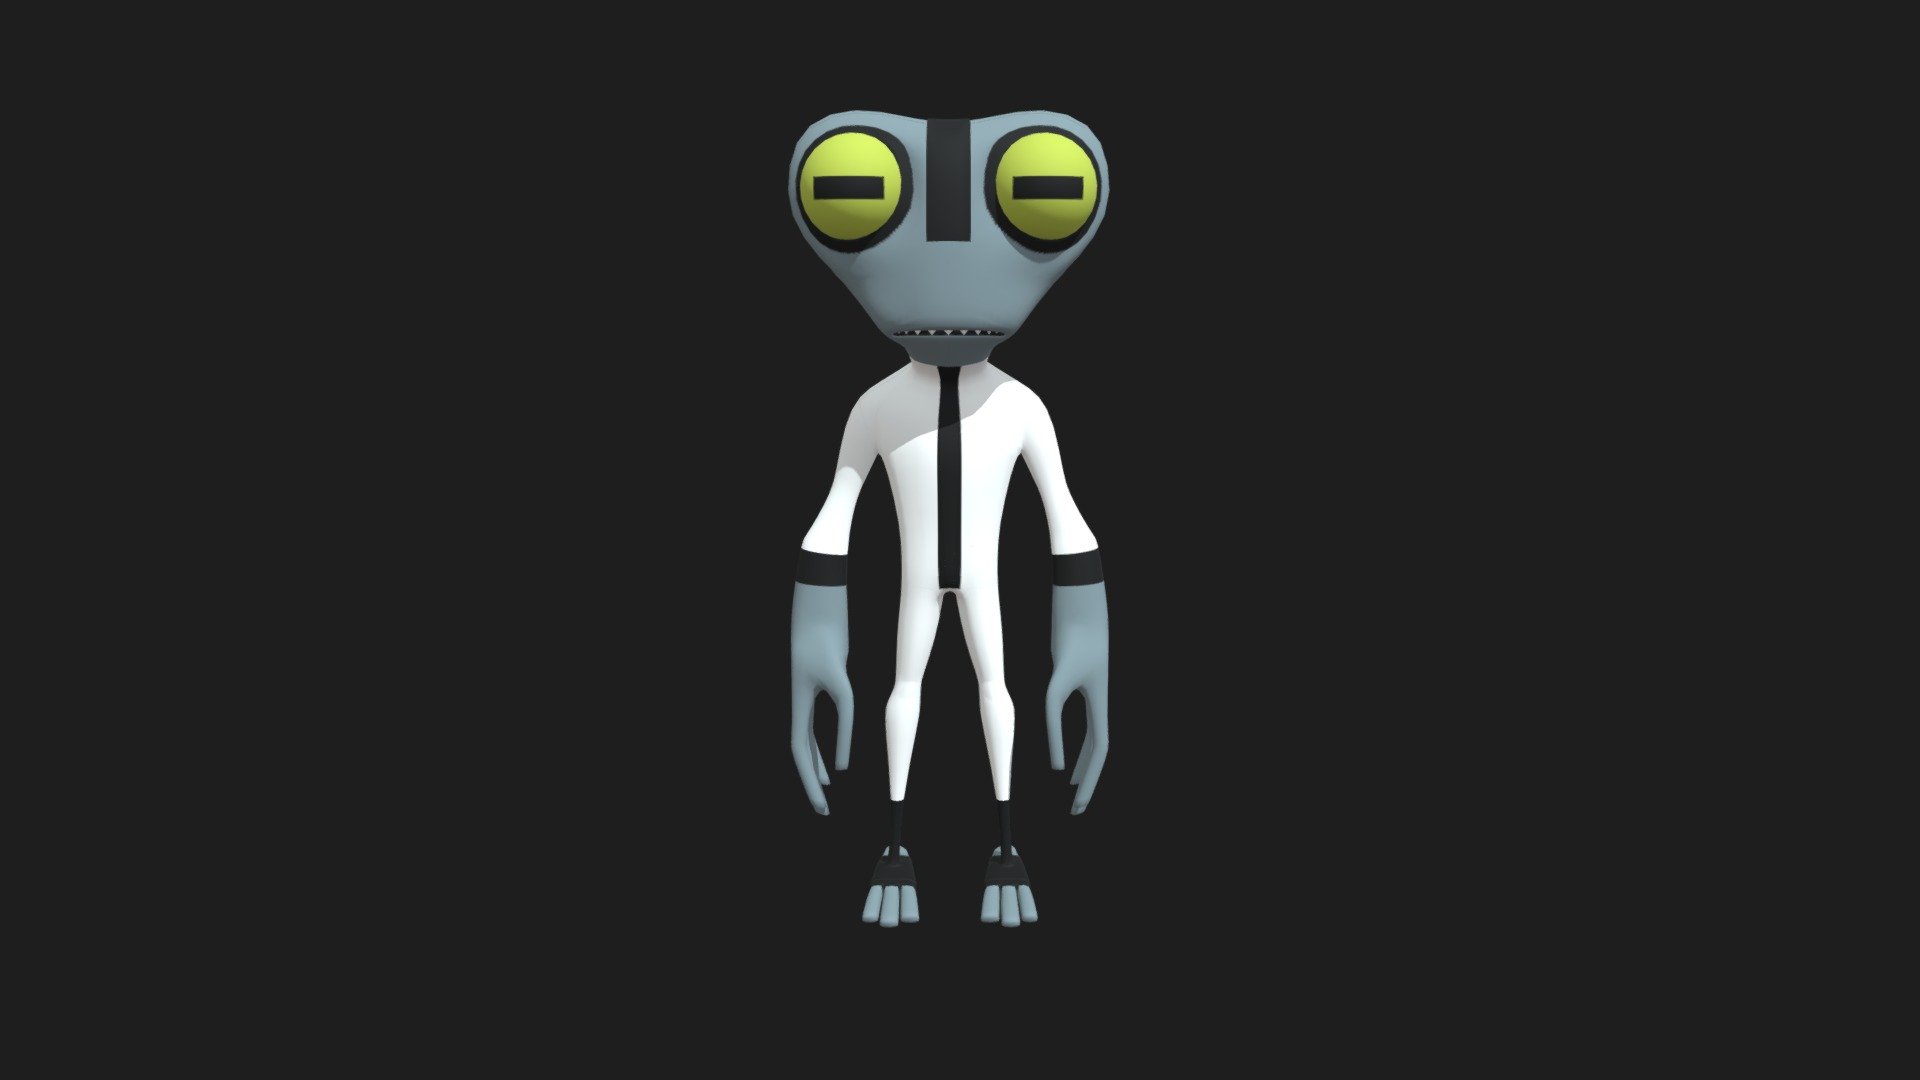 Ben 10 Grey Matter alien.

The Galvan are a species of small bipedal frog-like amphibians. Galvan are about five inches tall on average. Their bodies consist of soft and flexible bones, allowing them to squeeze into tight spaces or quickly escape from danger 3d model